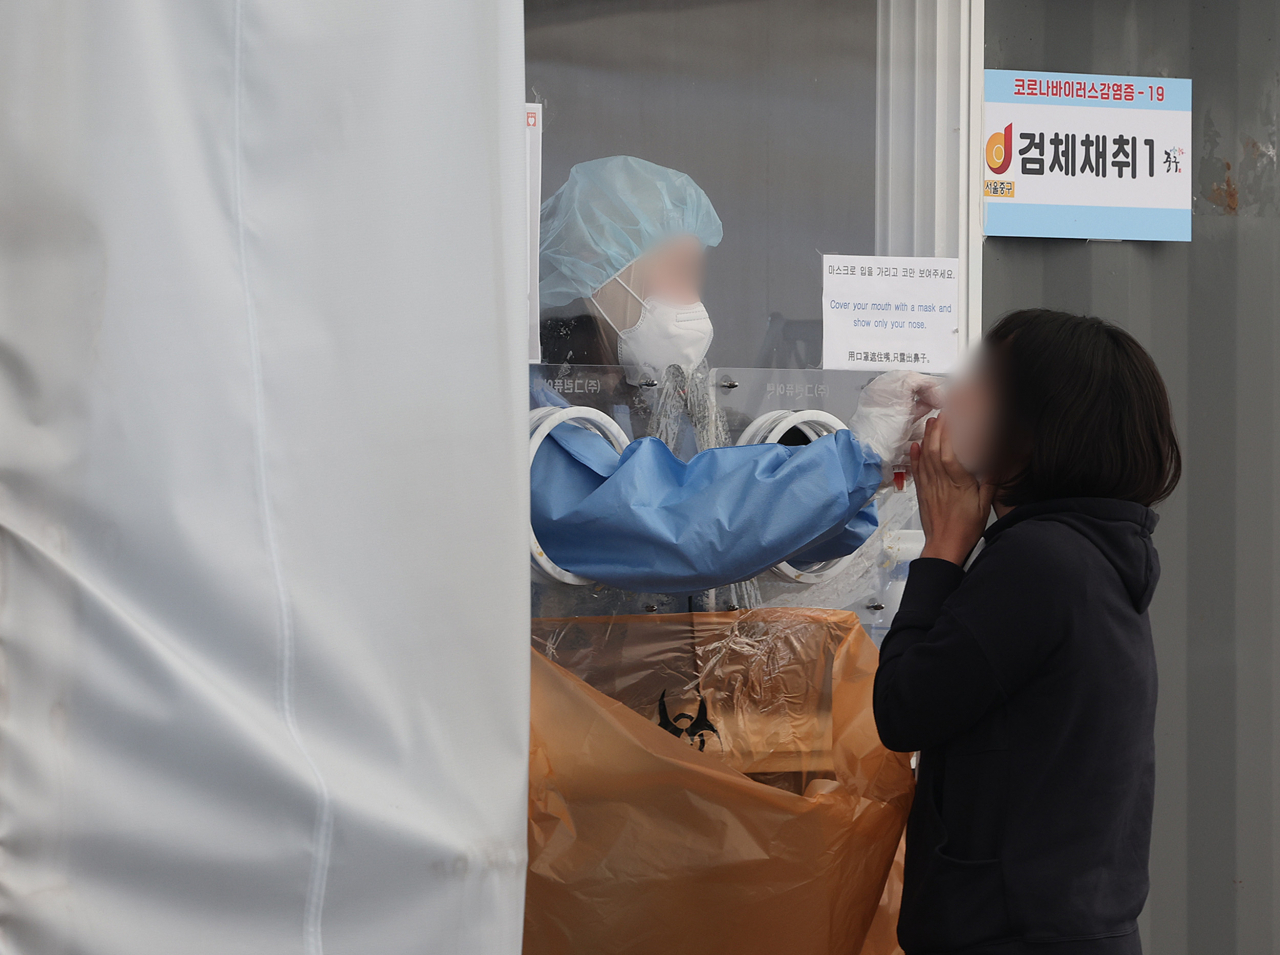 A person gets tested for COVID-19 at a testing center in Seoul on Wednesday. (Yonhap)